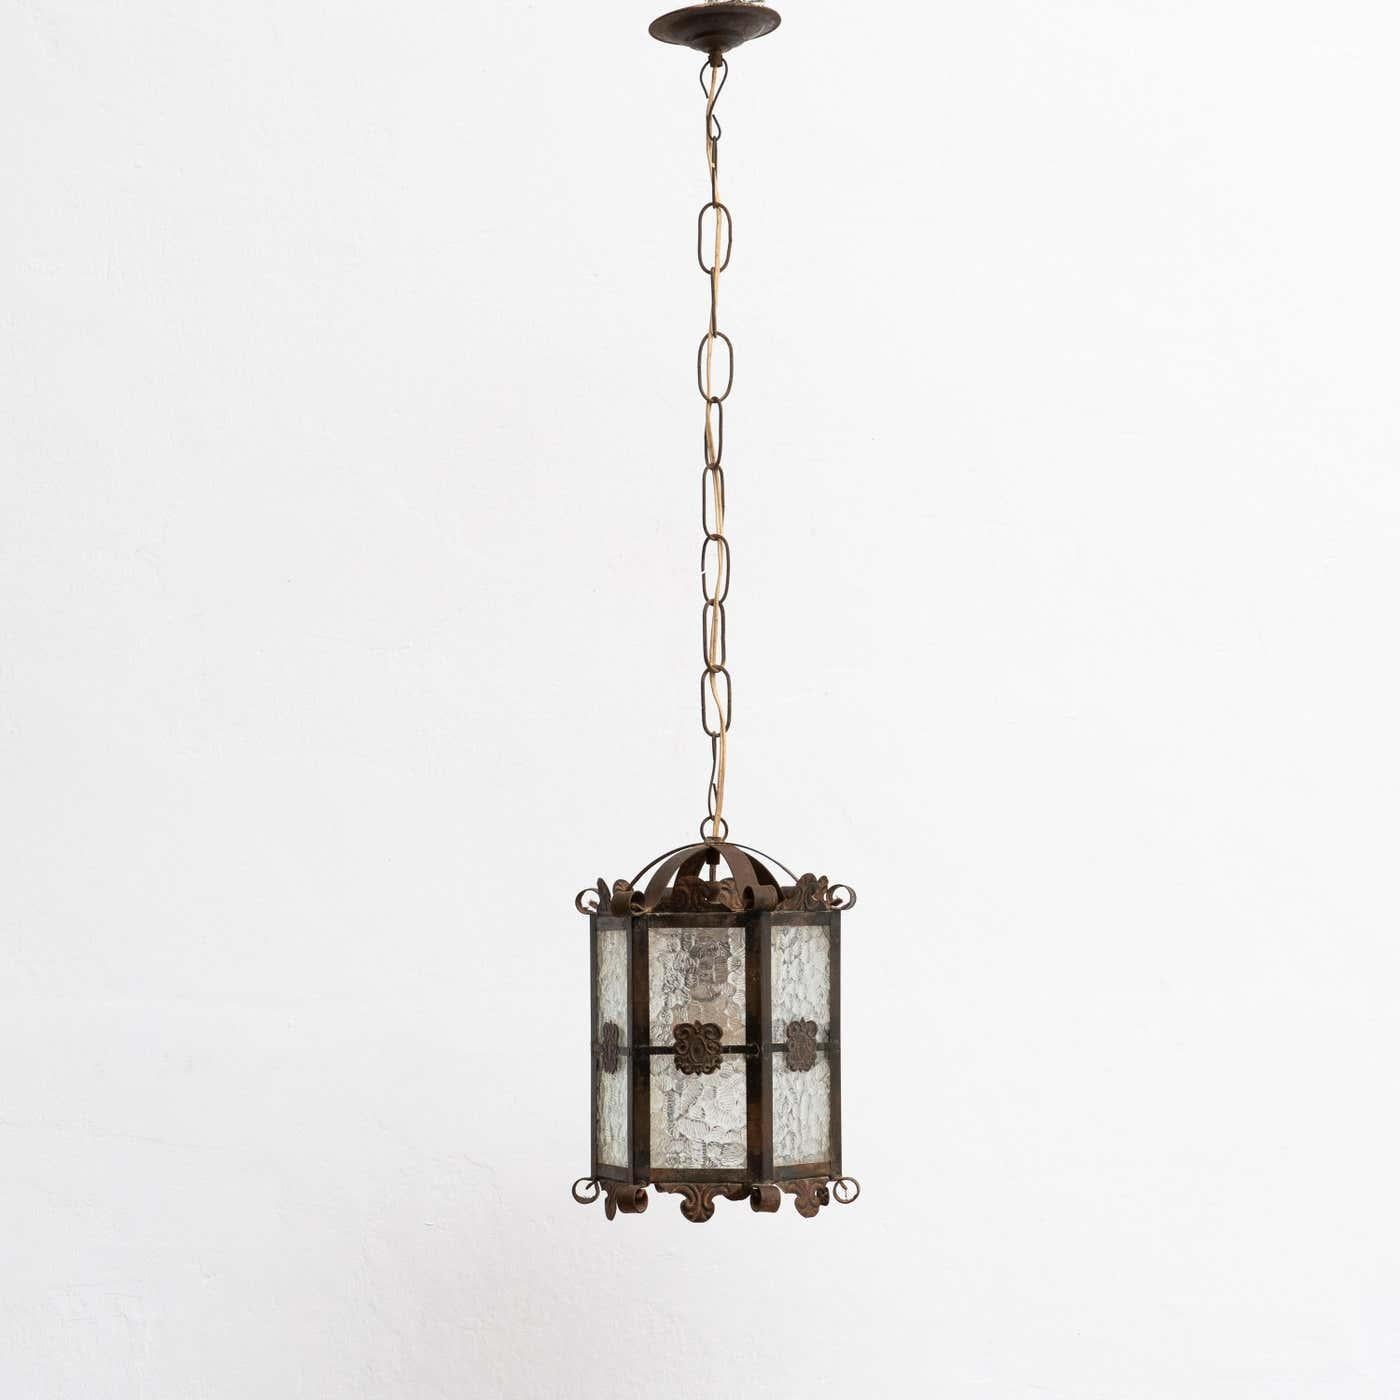 Antique metal ceiling lamp.

By unknown manufacturer, made in circa 1950.

In original condition, with minor wear consistent with age and use, preserving a beautiful patina.

Electrification has not been tested, wired for Europe.

It has some traces